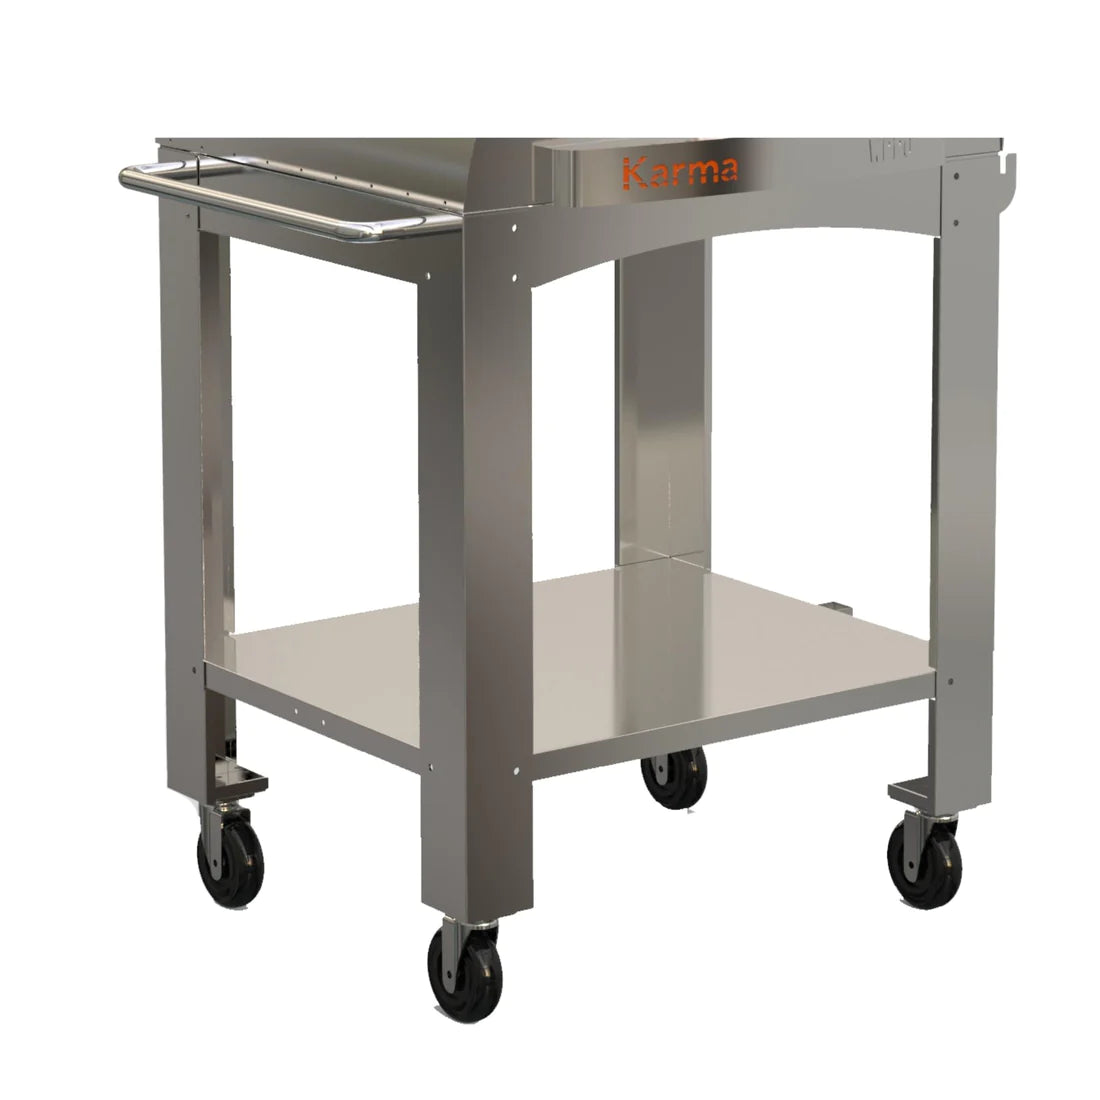 WPPO Karma 32 Stand Cart Only - Smart Nature Store